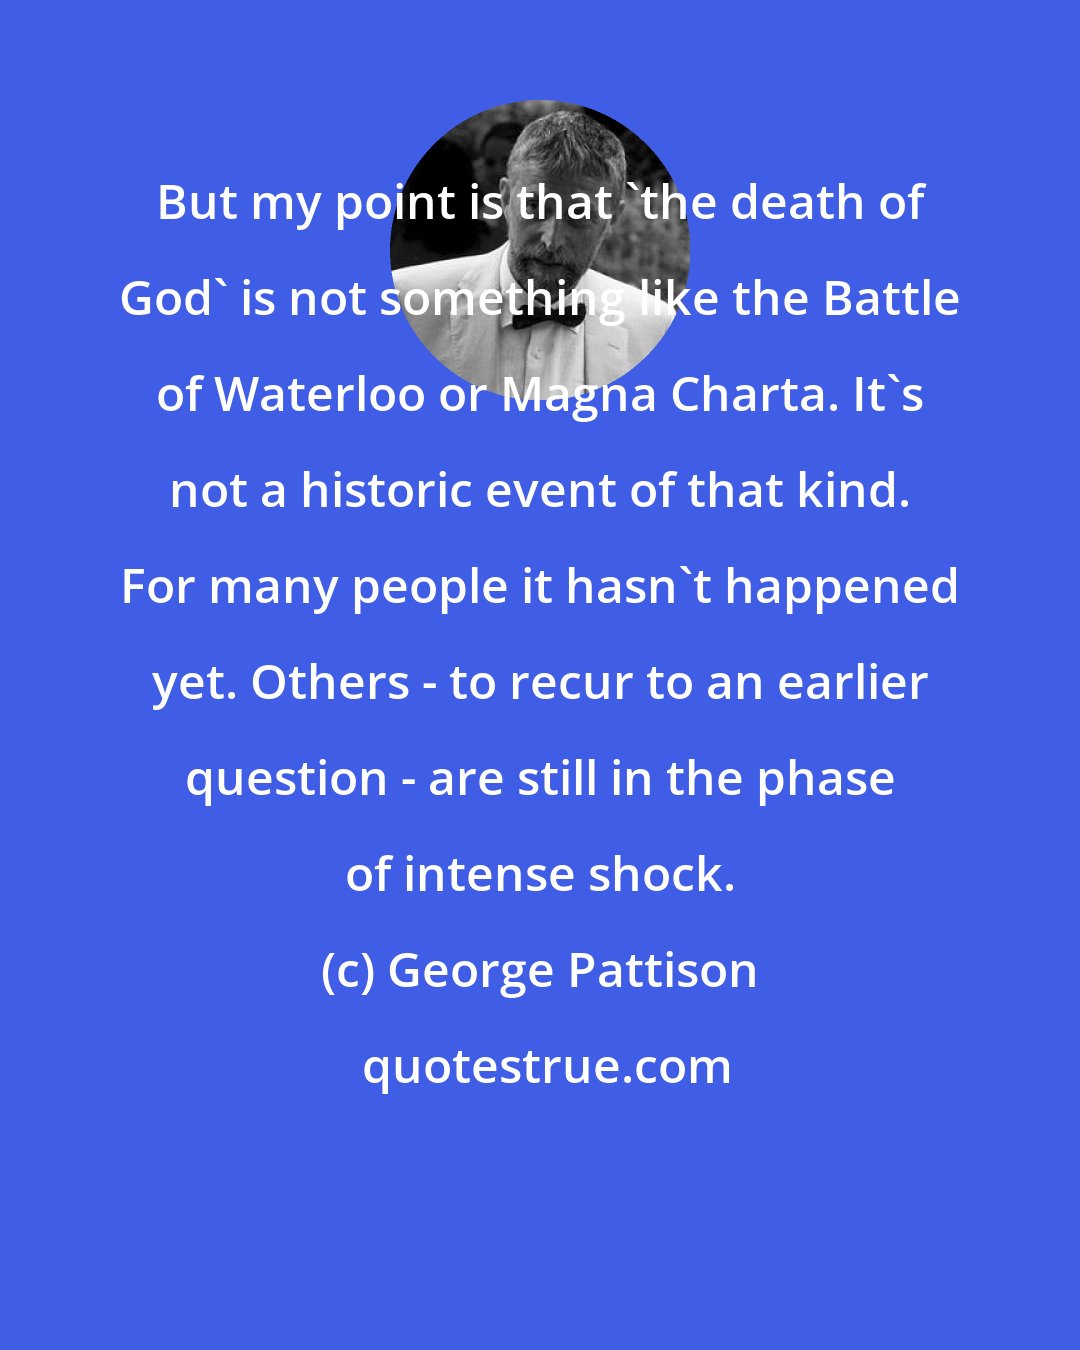 George Pattison: But my point is that 'the death of God' is not something like the Battle of Waterloo or Magna Charta. It's not a historic event of that kind. For many people it hasn't happened yet. Others - to recur to an earlier question - are still in the phase of intense shock.